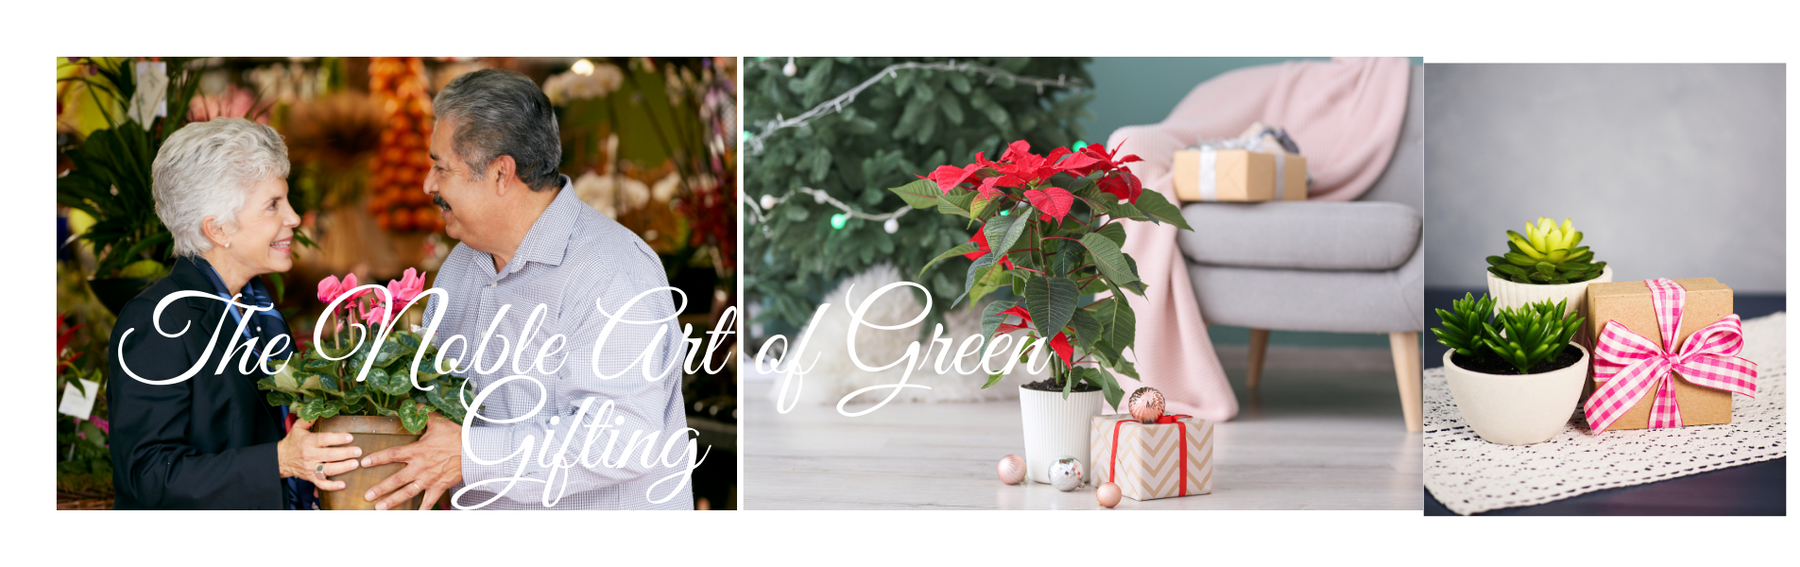 The Noble Art of Green Gifting - CGASPL